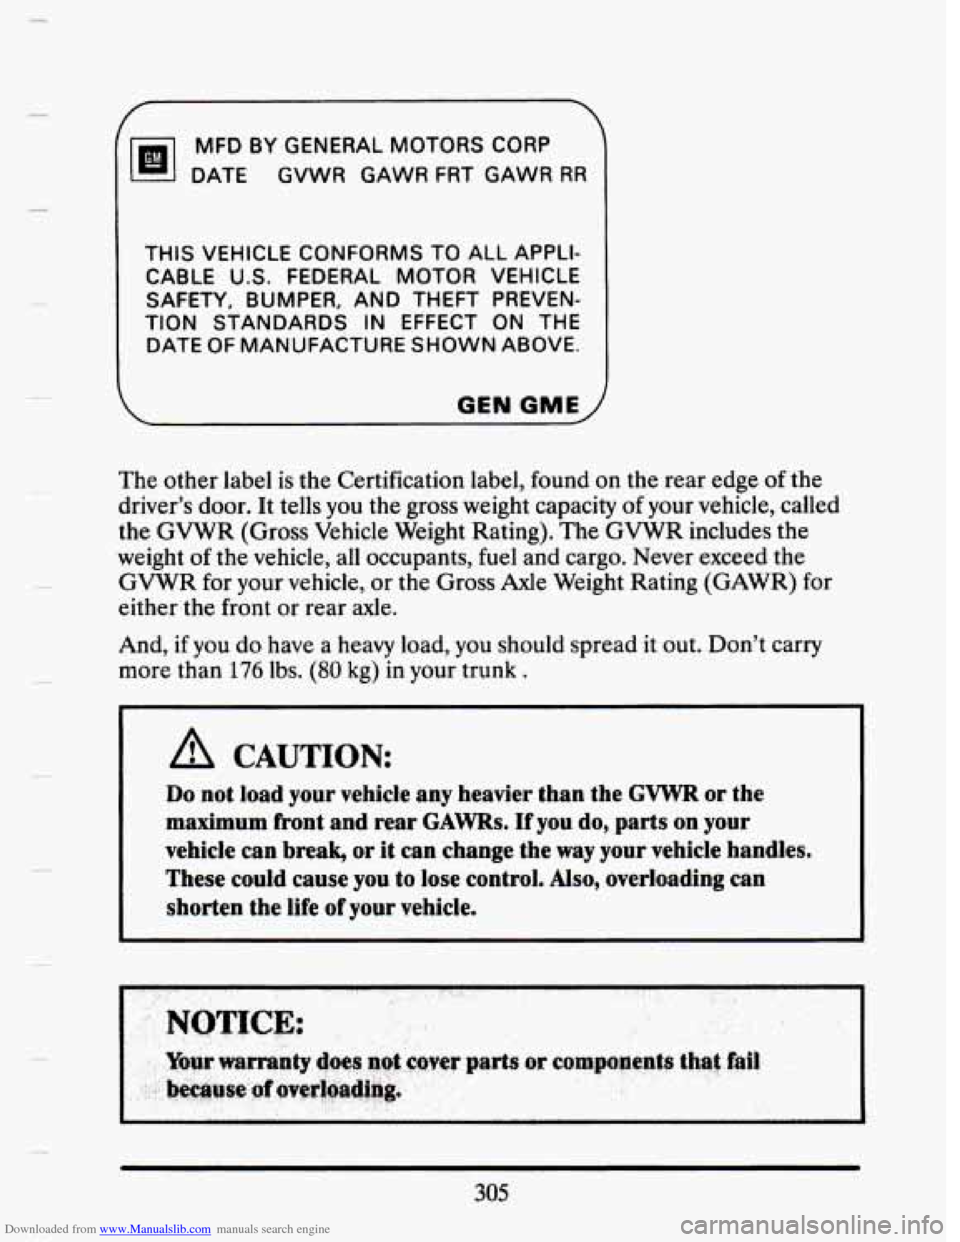 CADILLAC SEVILLE 1993 4.G Owners Manual Downloaded from www.Manualslib.com manuals search engine MFD BY  GENERAL  MOTORS  CORP 
DATE  GVWR  GAWR  FRT GAWR 
RR 
THIS  VEHICLE  CONFORMS  TO  ALL  APPLI- 
CABLE 
U.S. FEDERAL  MOTOR  VEHICLE 
T